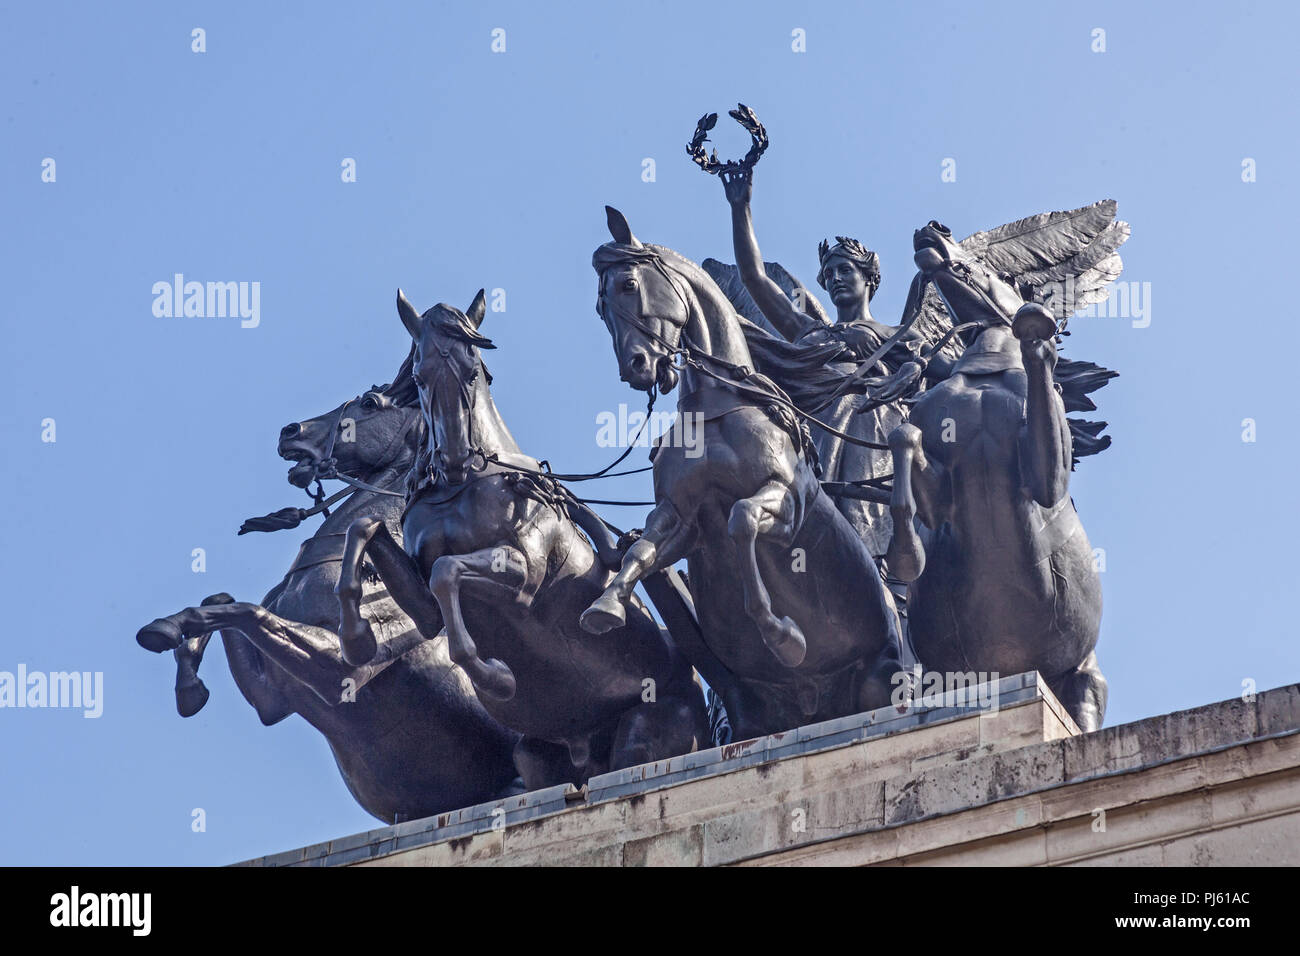 The bronze sculpture of Nike, the Winged Goddess of Victory, driving a four horse chariot, surmounting the Wellington Arch at Hyde Park Corner Stock Photo